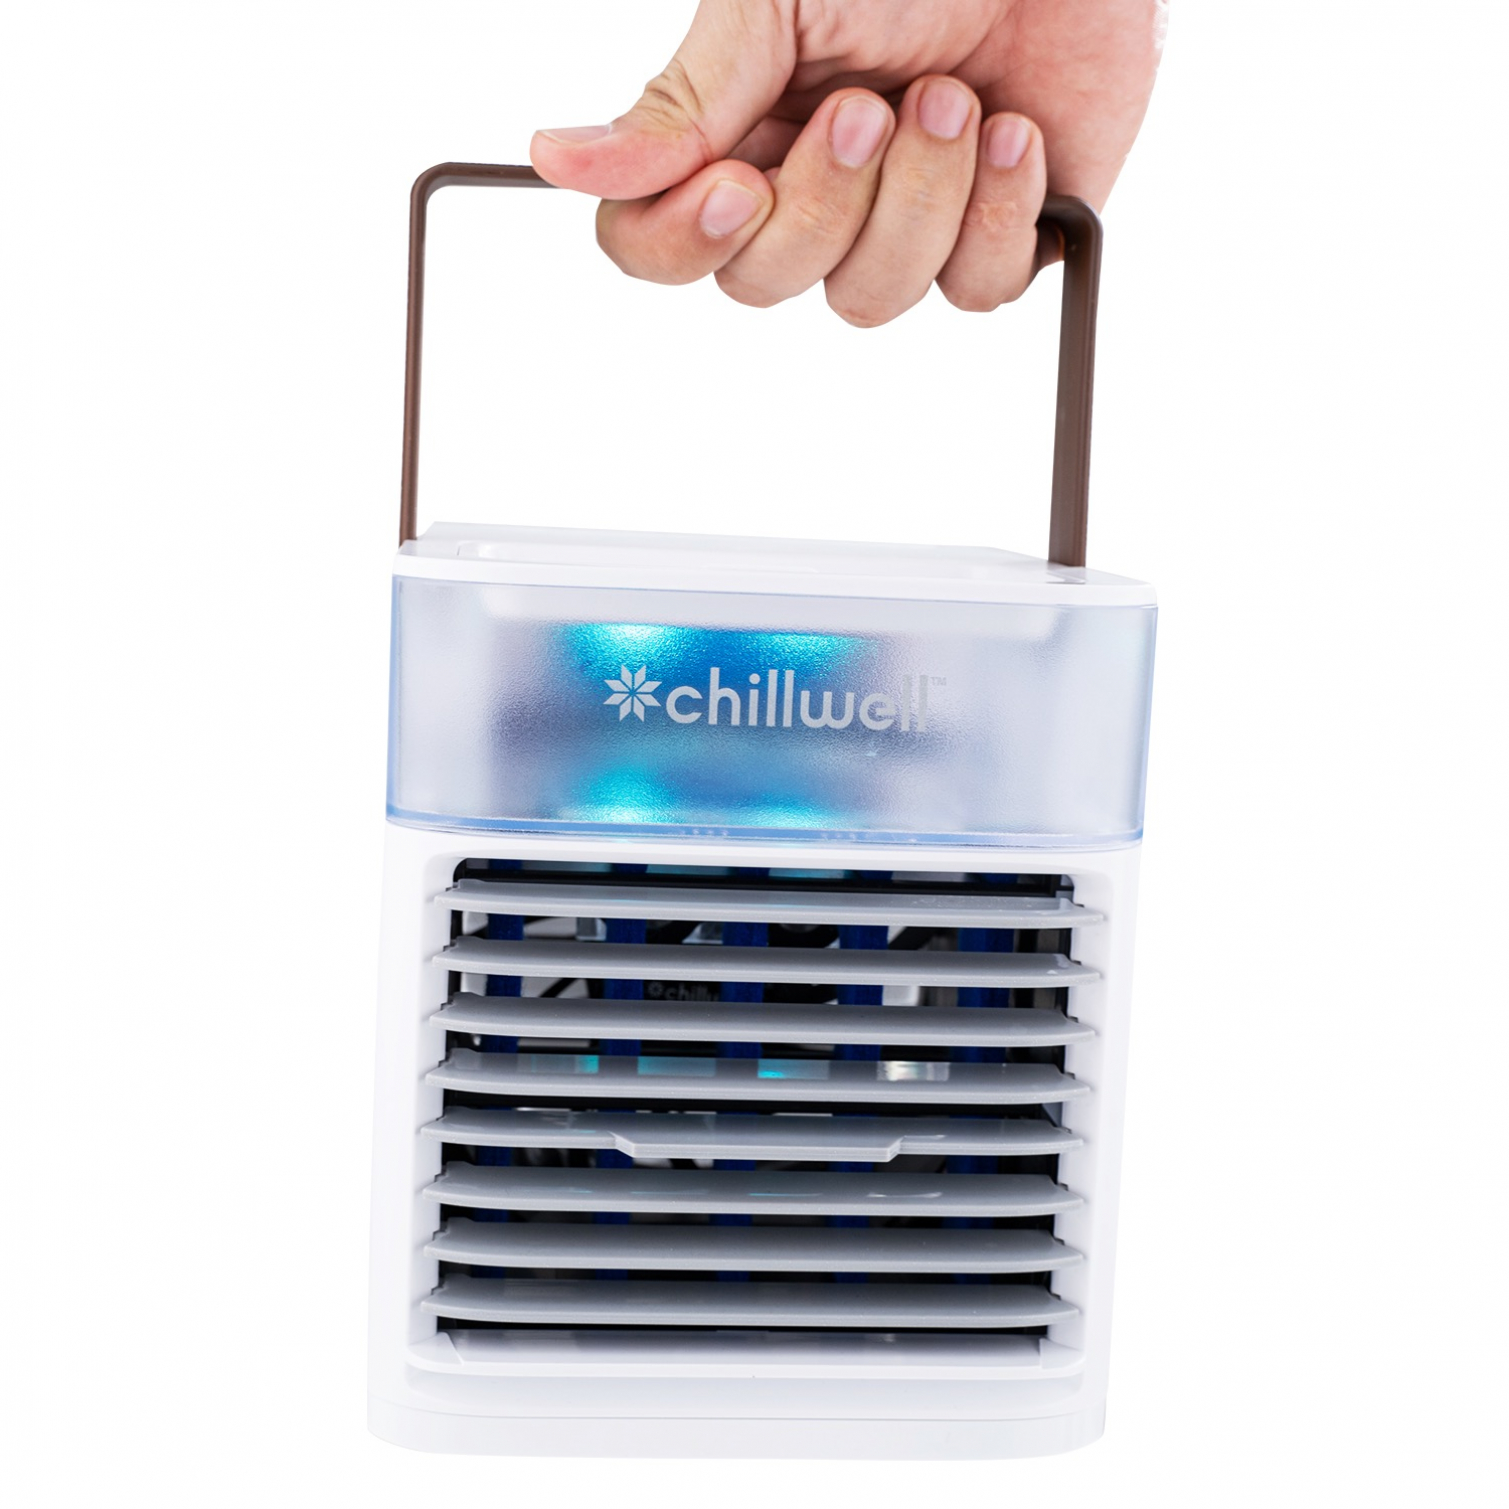 Chillwell AC Air Conditioning Unit